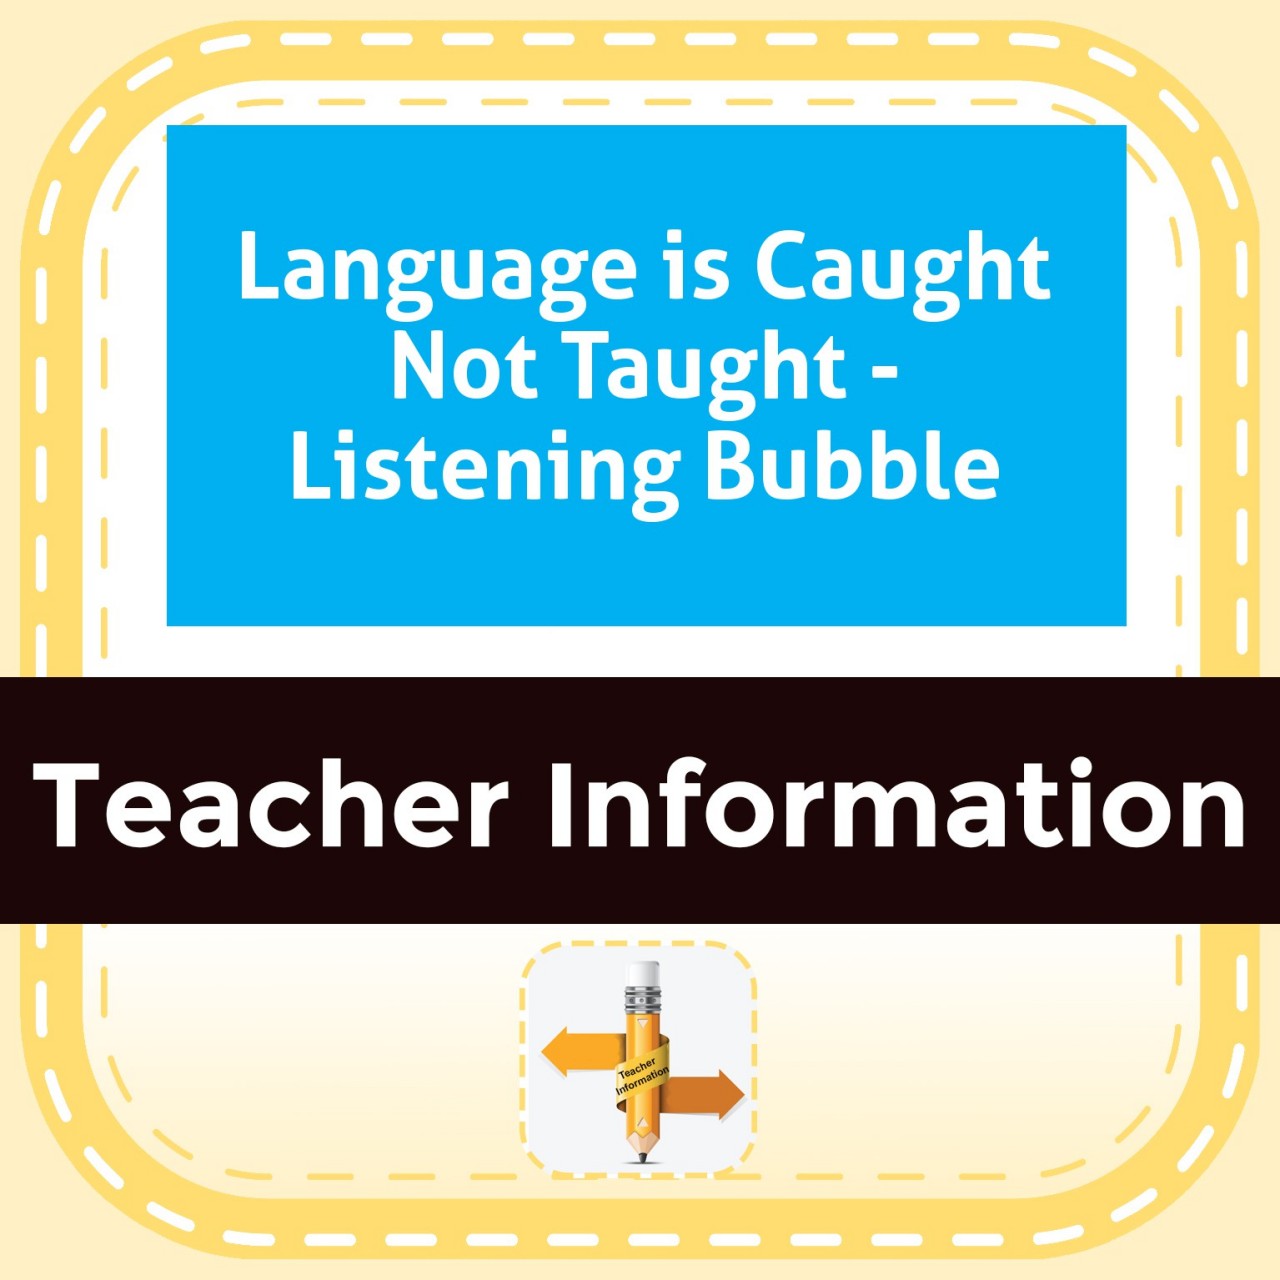 Language is Caught Not Taught - Listening Bubble